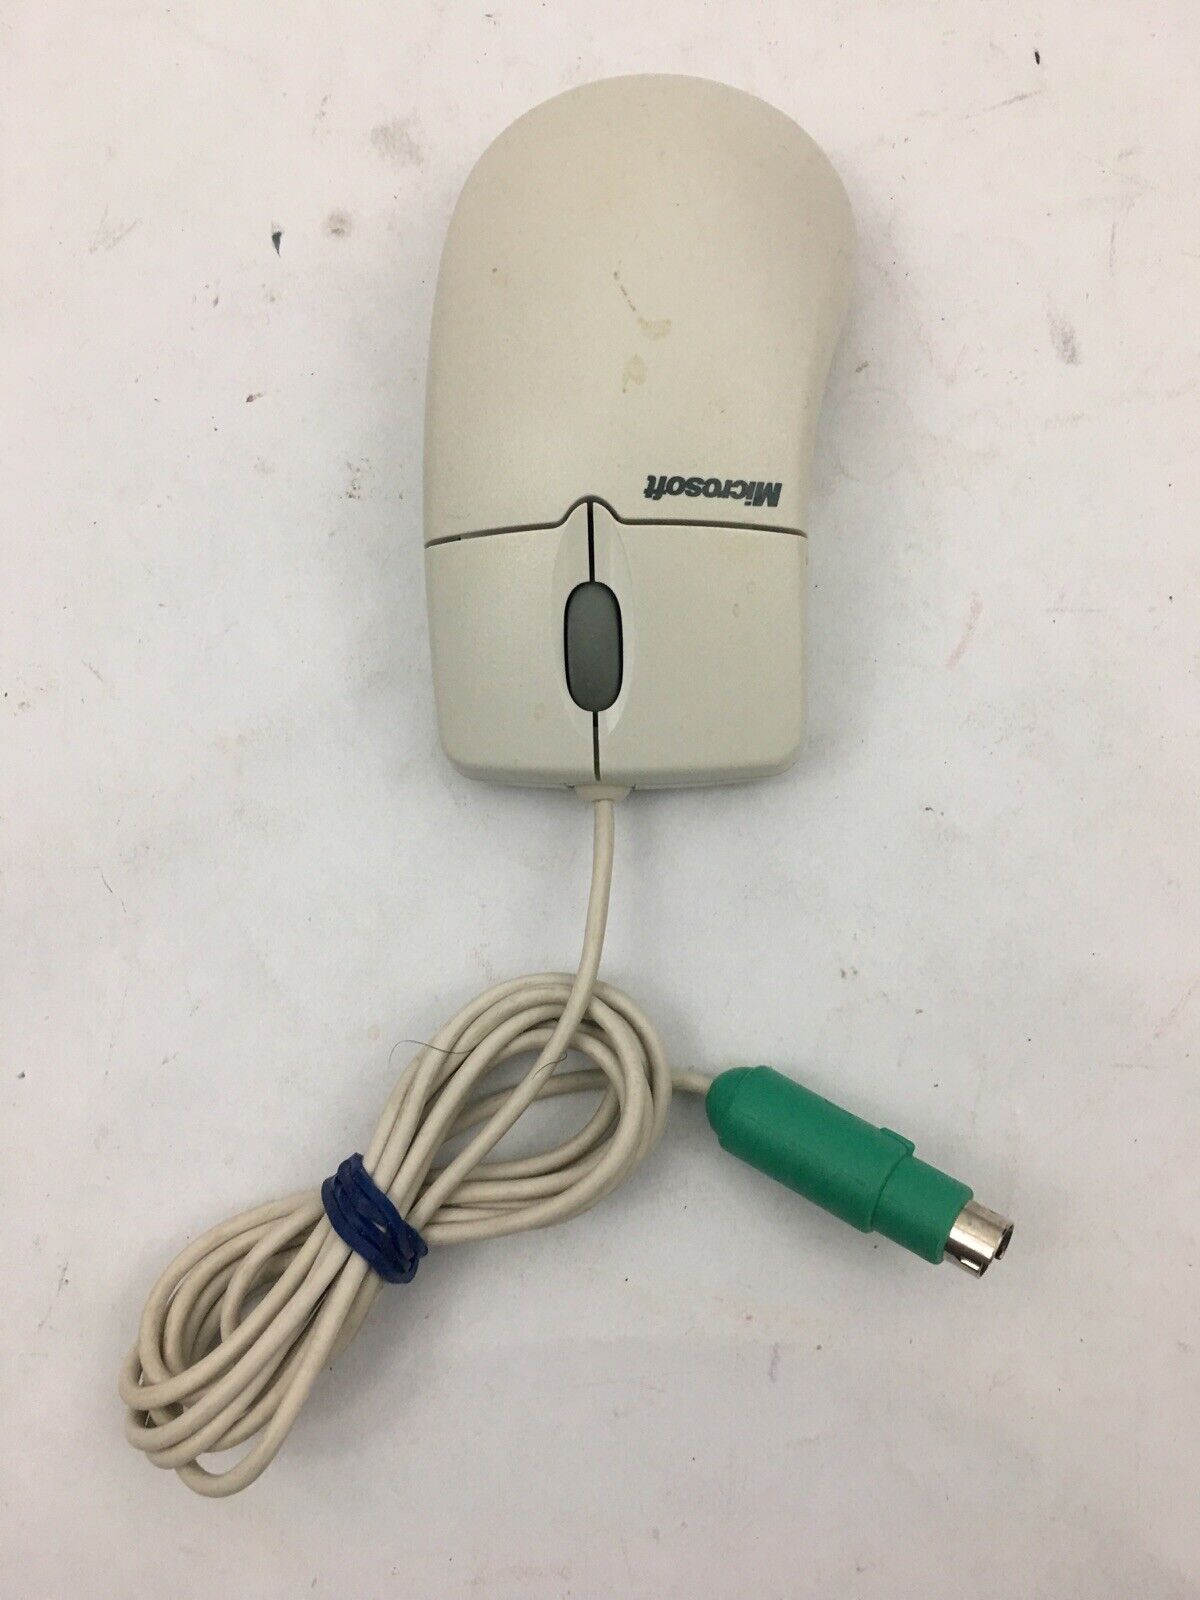 Vintage Microsoft Mouse Port Compatible PS/2 Wired Mouse1.2A